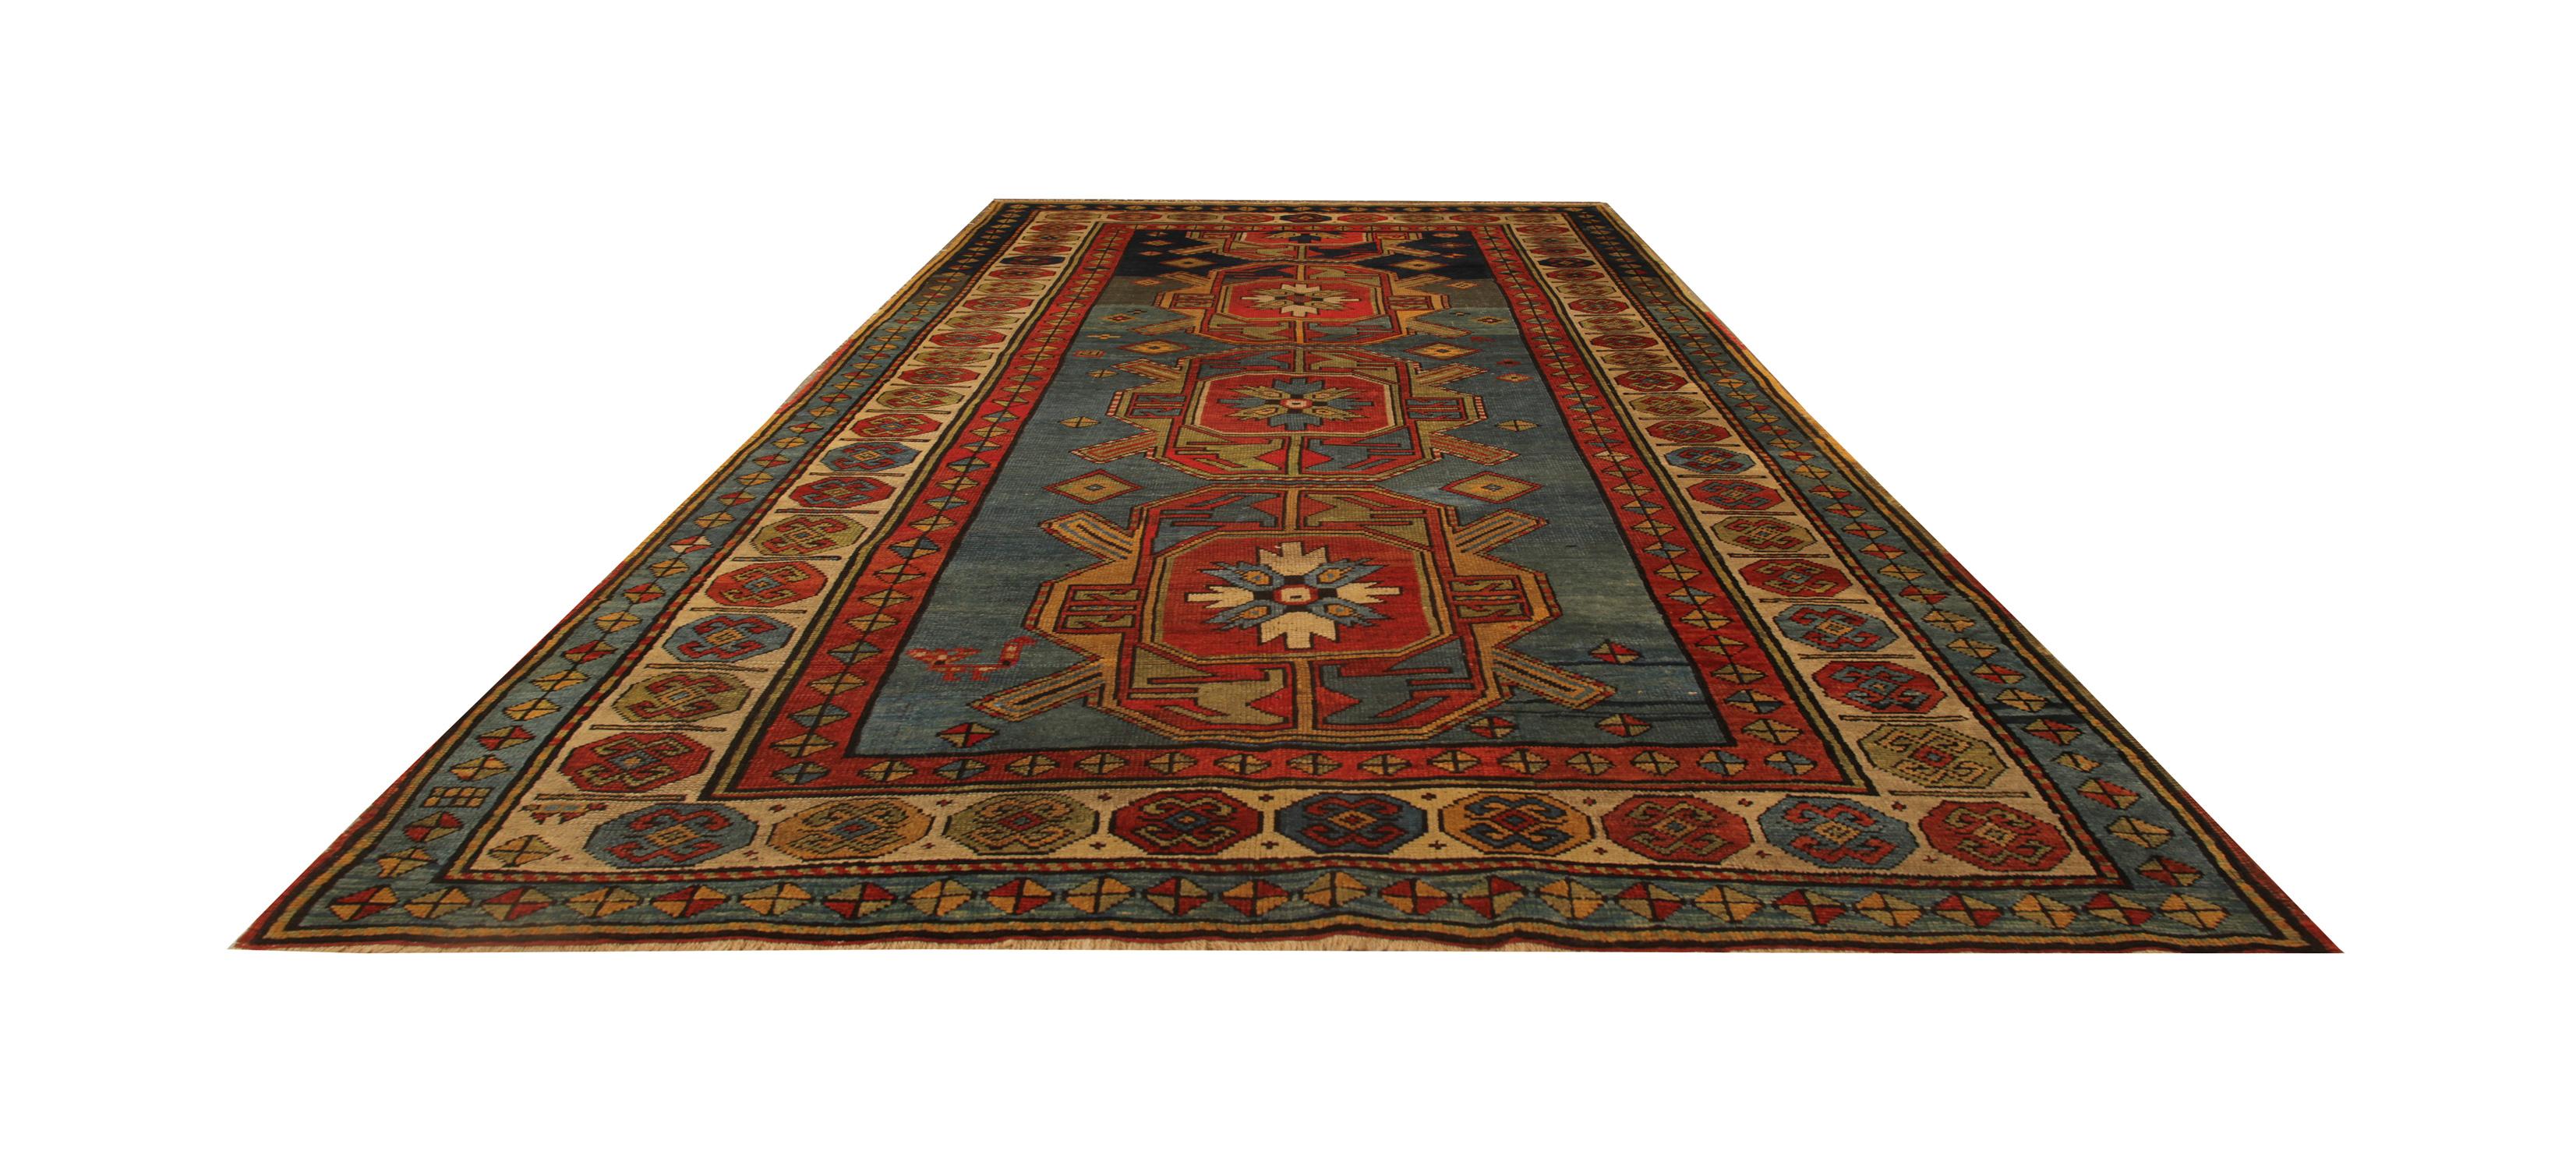 An excellent example of traditional Caucasian carpet rug weaving from the Kazak region. these Medallion ground design patterned rugs can be the best element of home decor objects to give warmth to the environment because this woven rug has a great